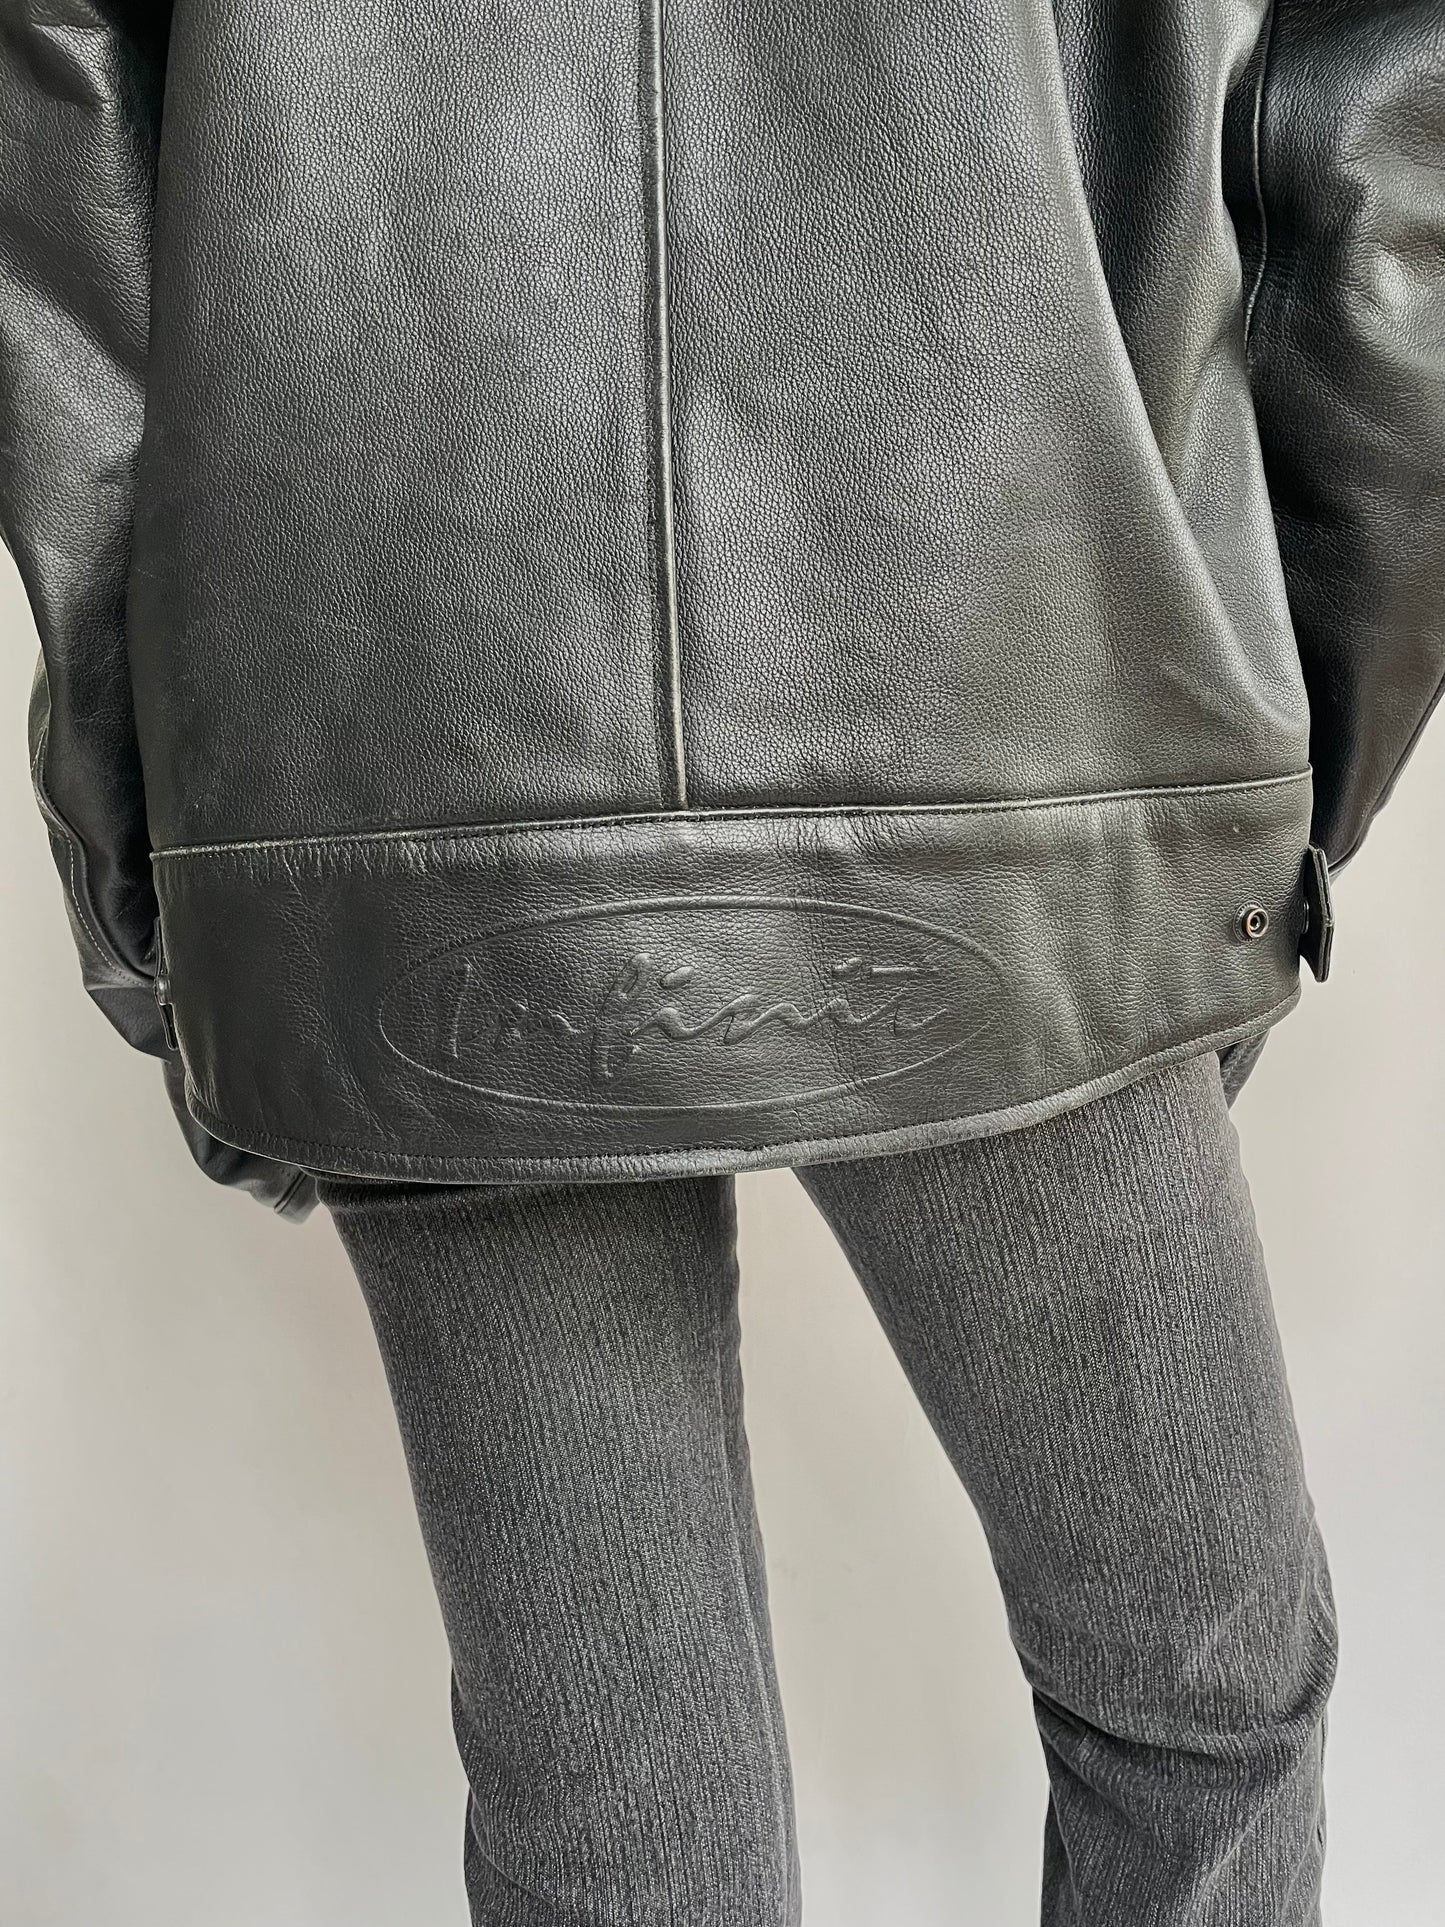 Vintage racer leather jacket by infinity